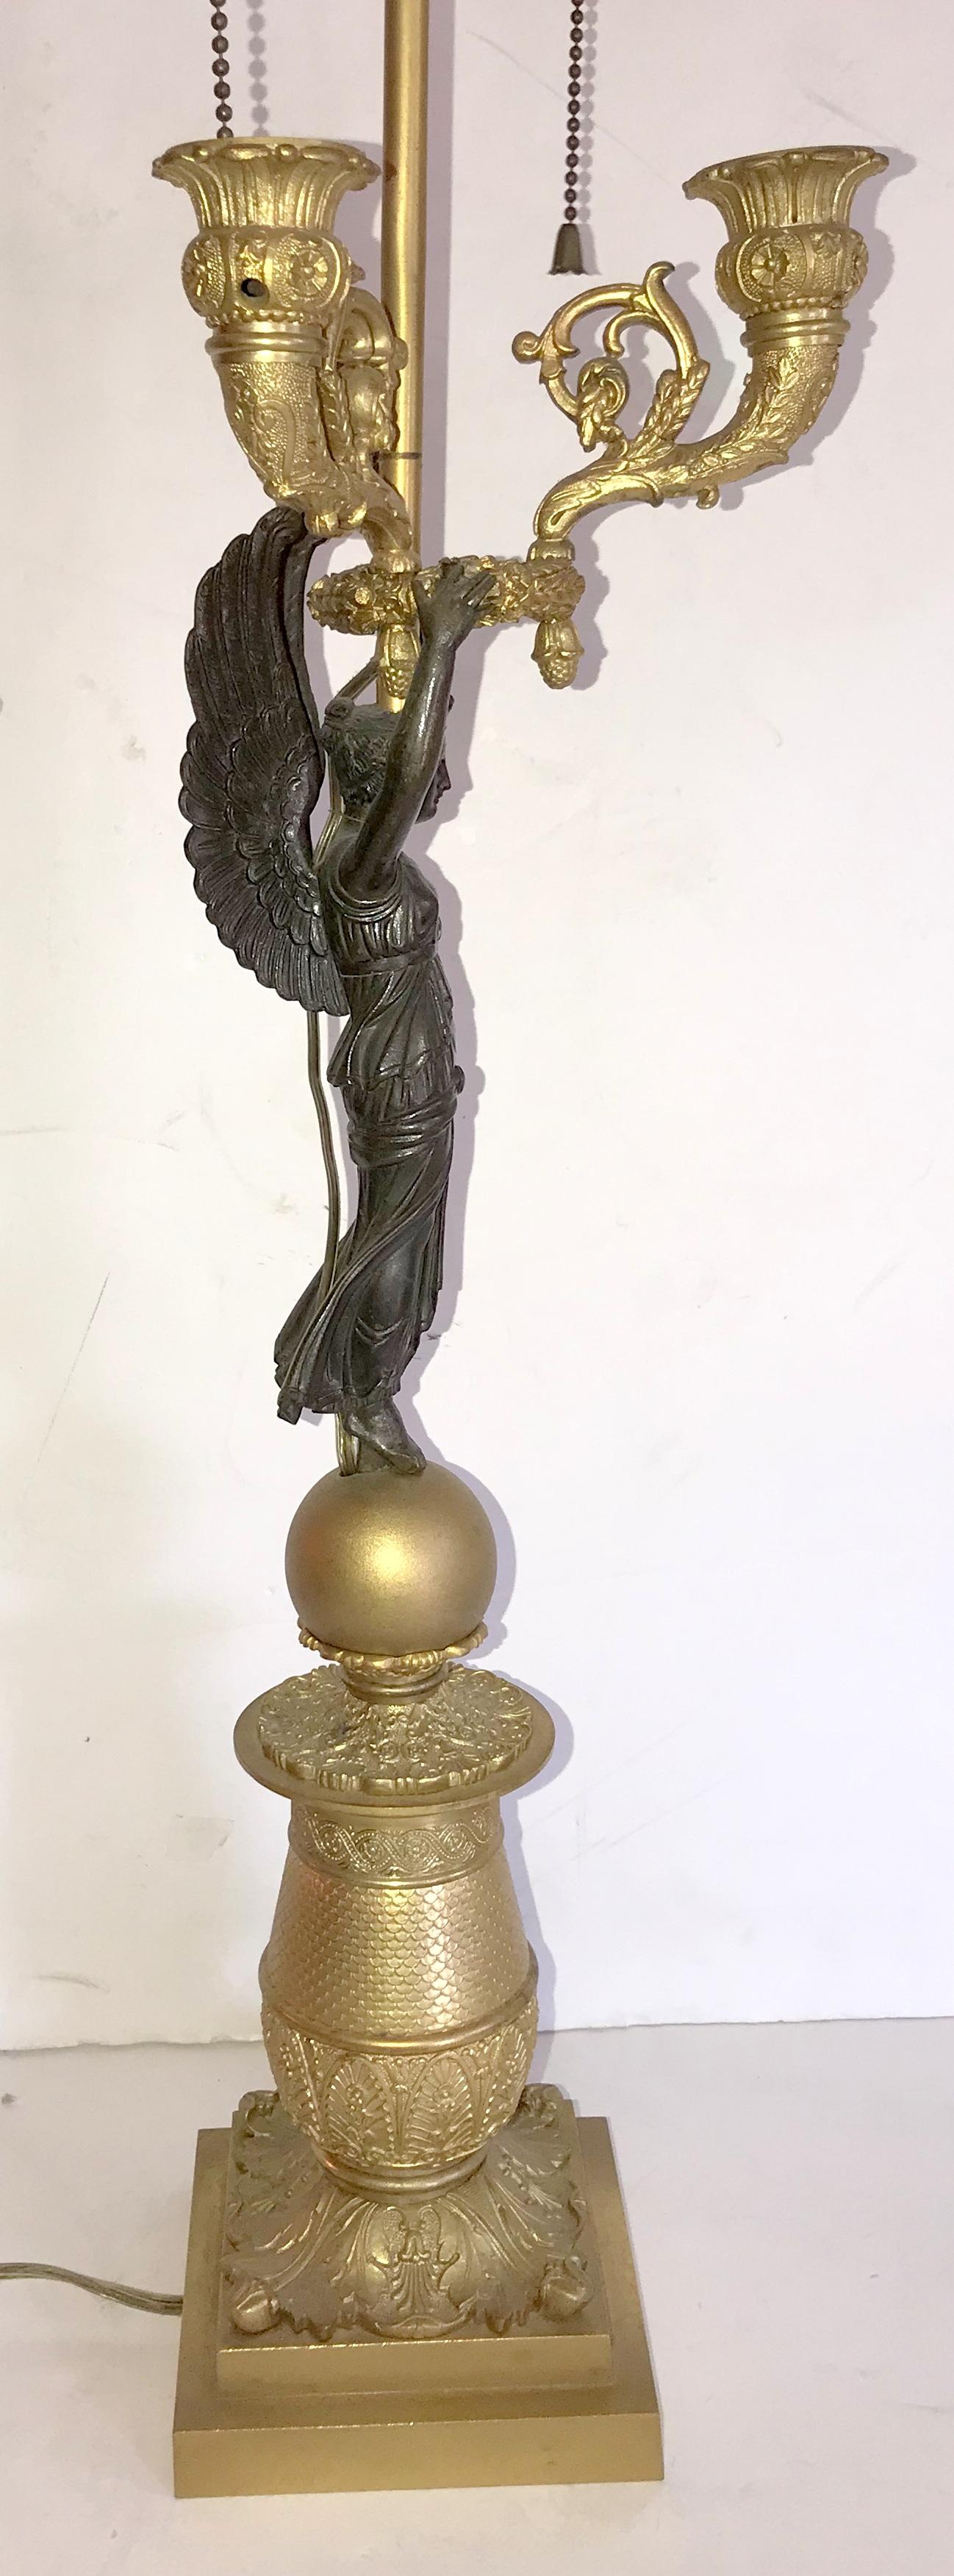 20th Century French Pair of Empire Patina Dore Bronze Winged Lady Victory Candelabras For Sale